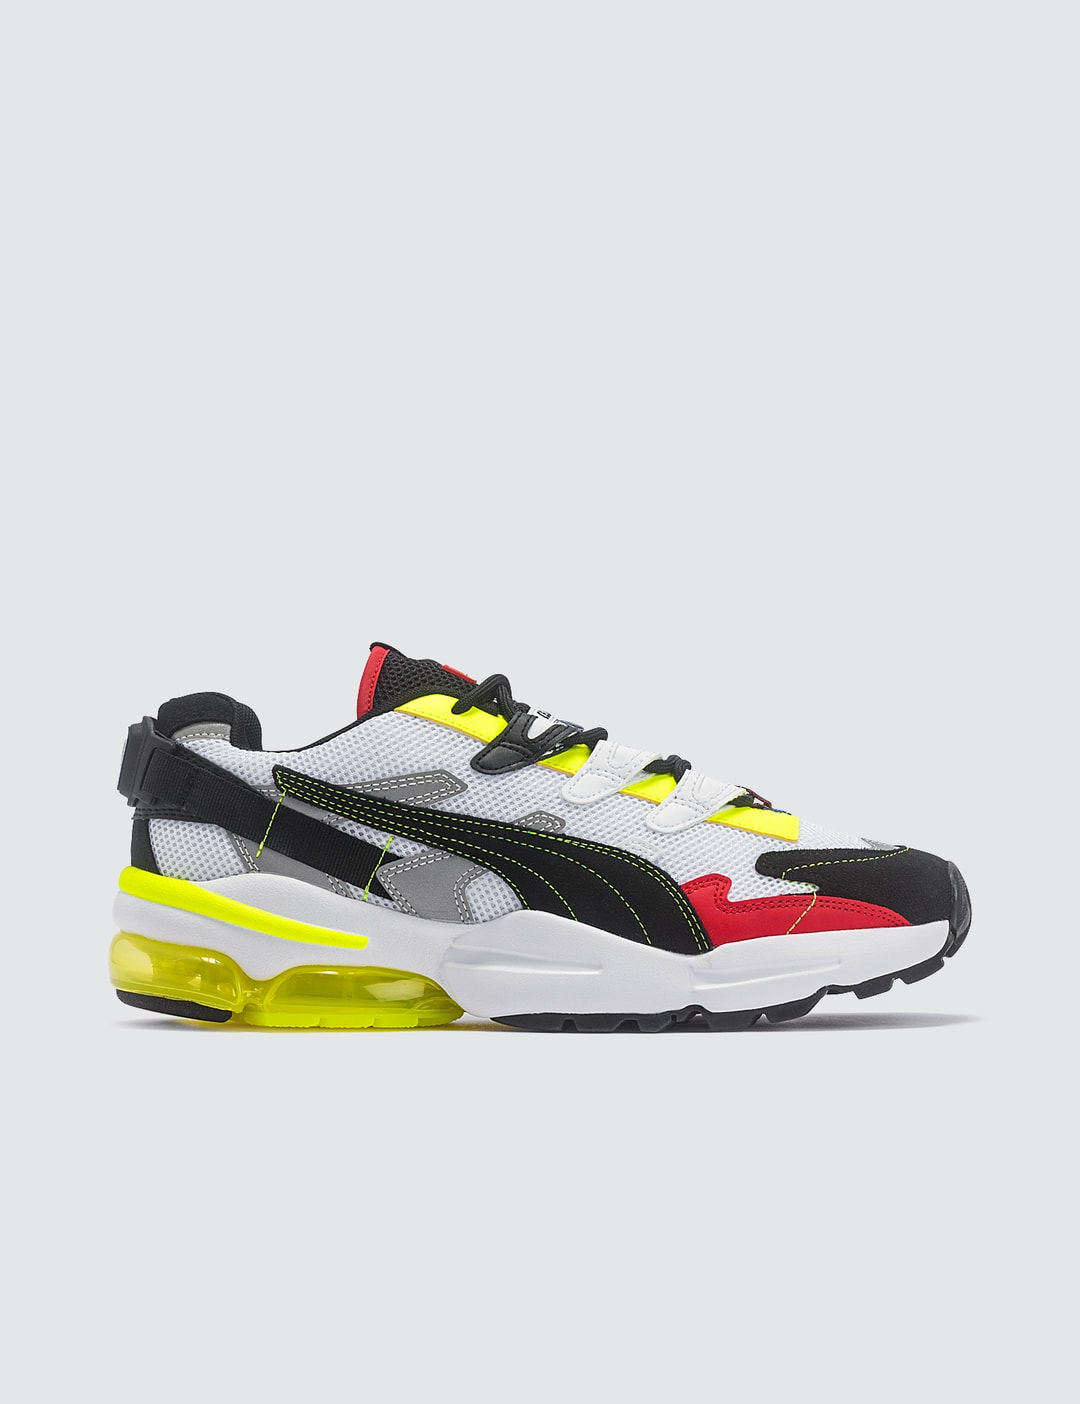 Puma - Ader Error X Puma Cell Alien Sneakers | HBX - Globally Fashion and Lifestyle Hypebeast